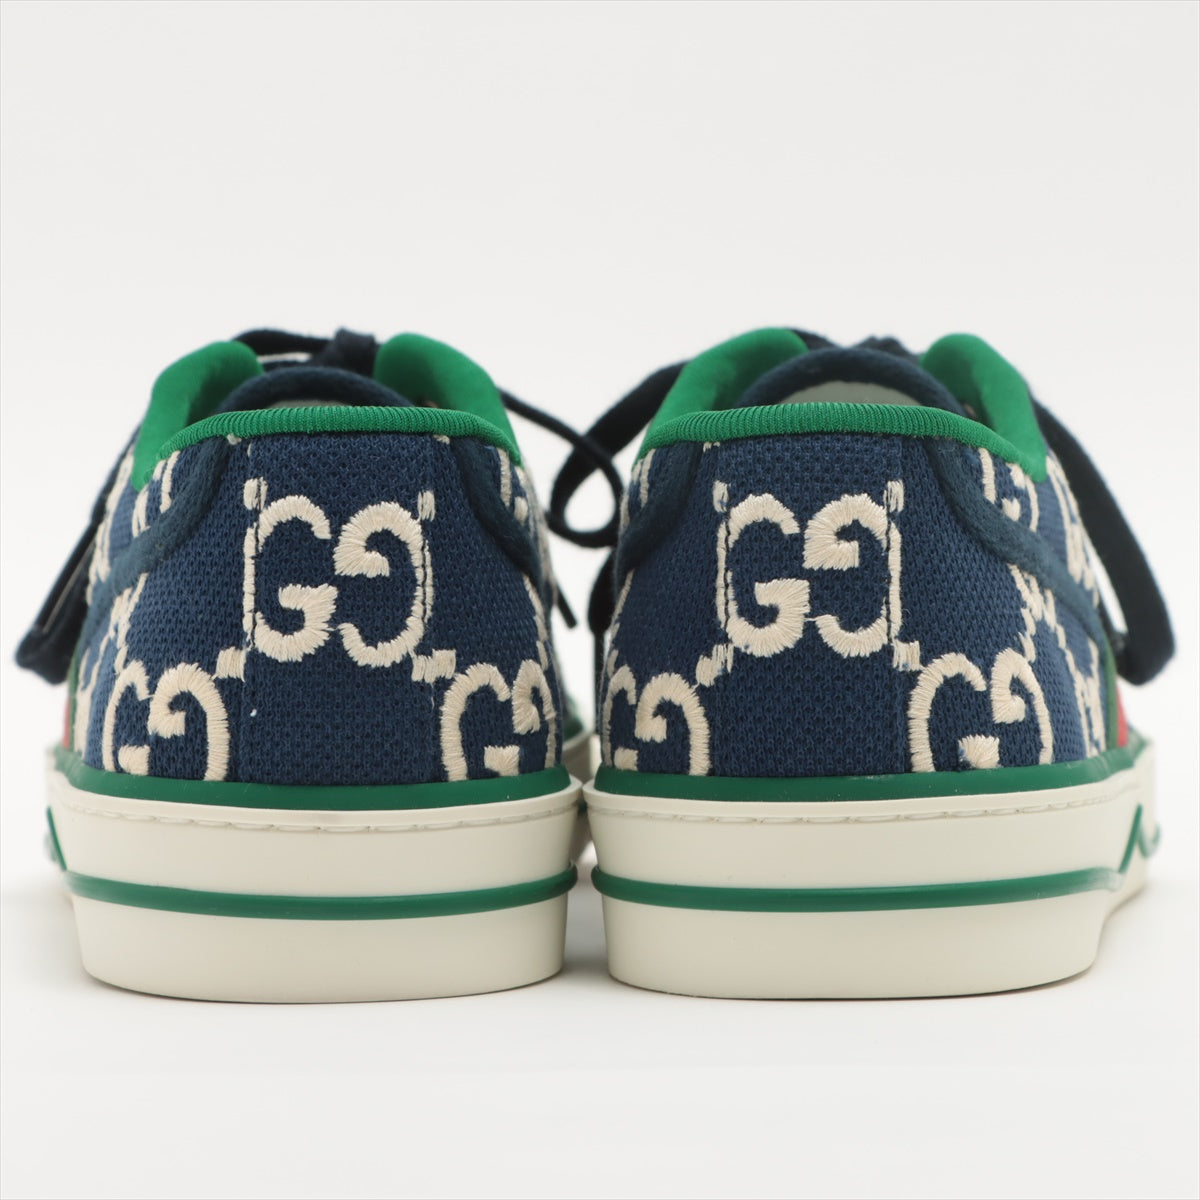 Gucci canvass Sneakers 6 Men's Navy blue Tennis 1977